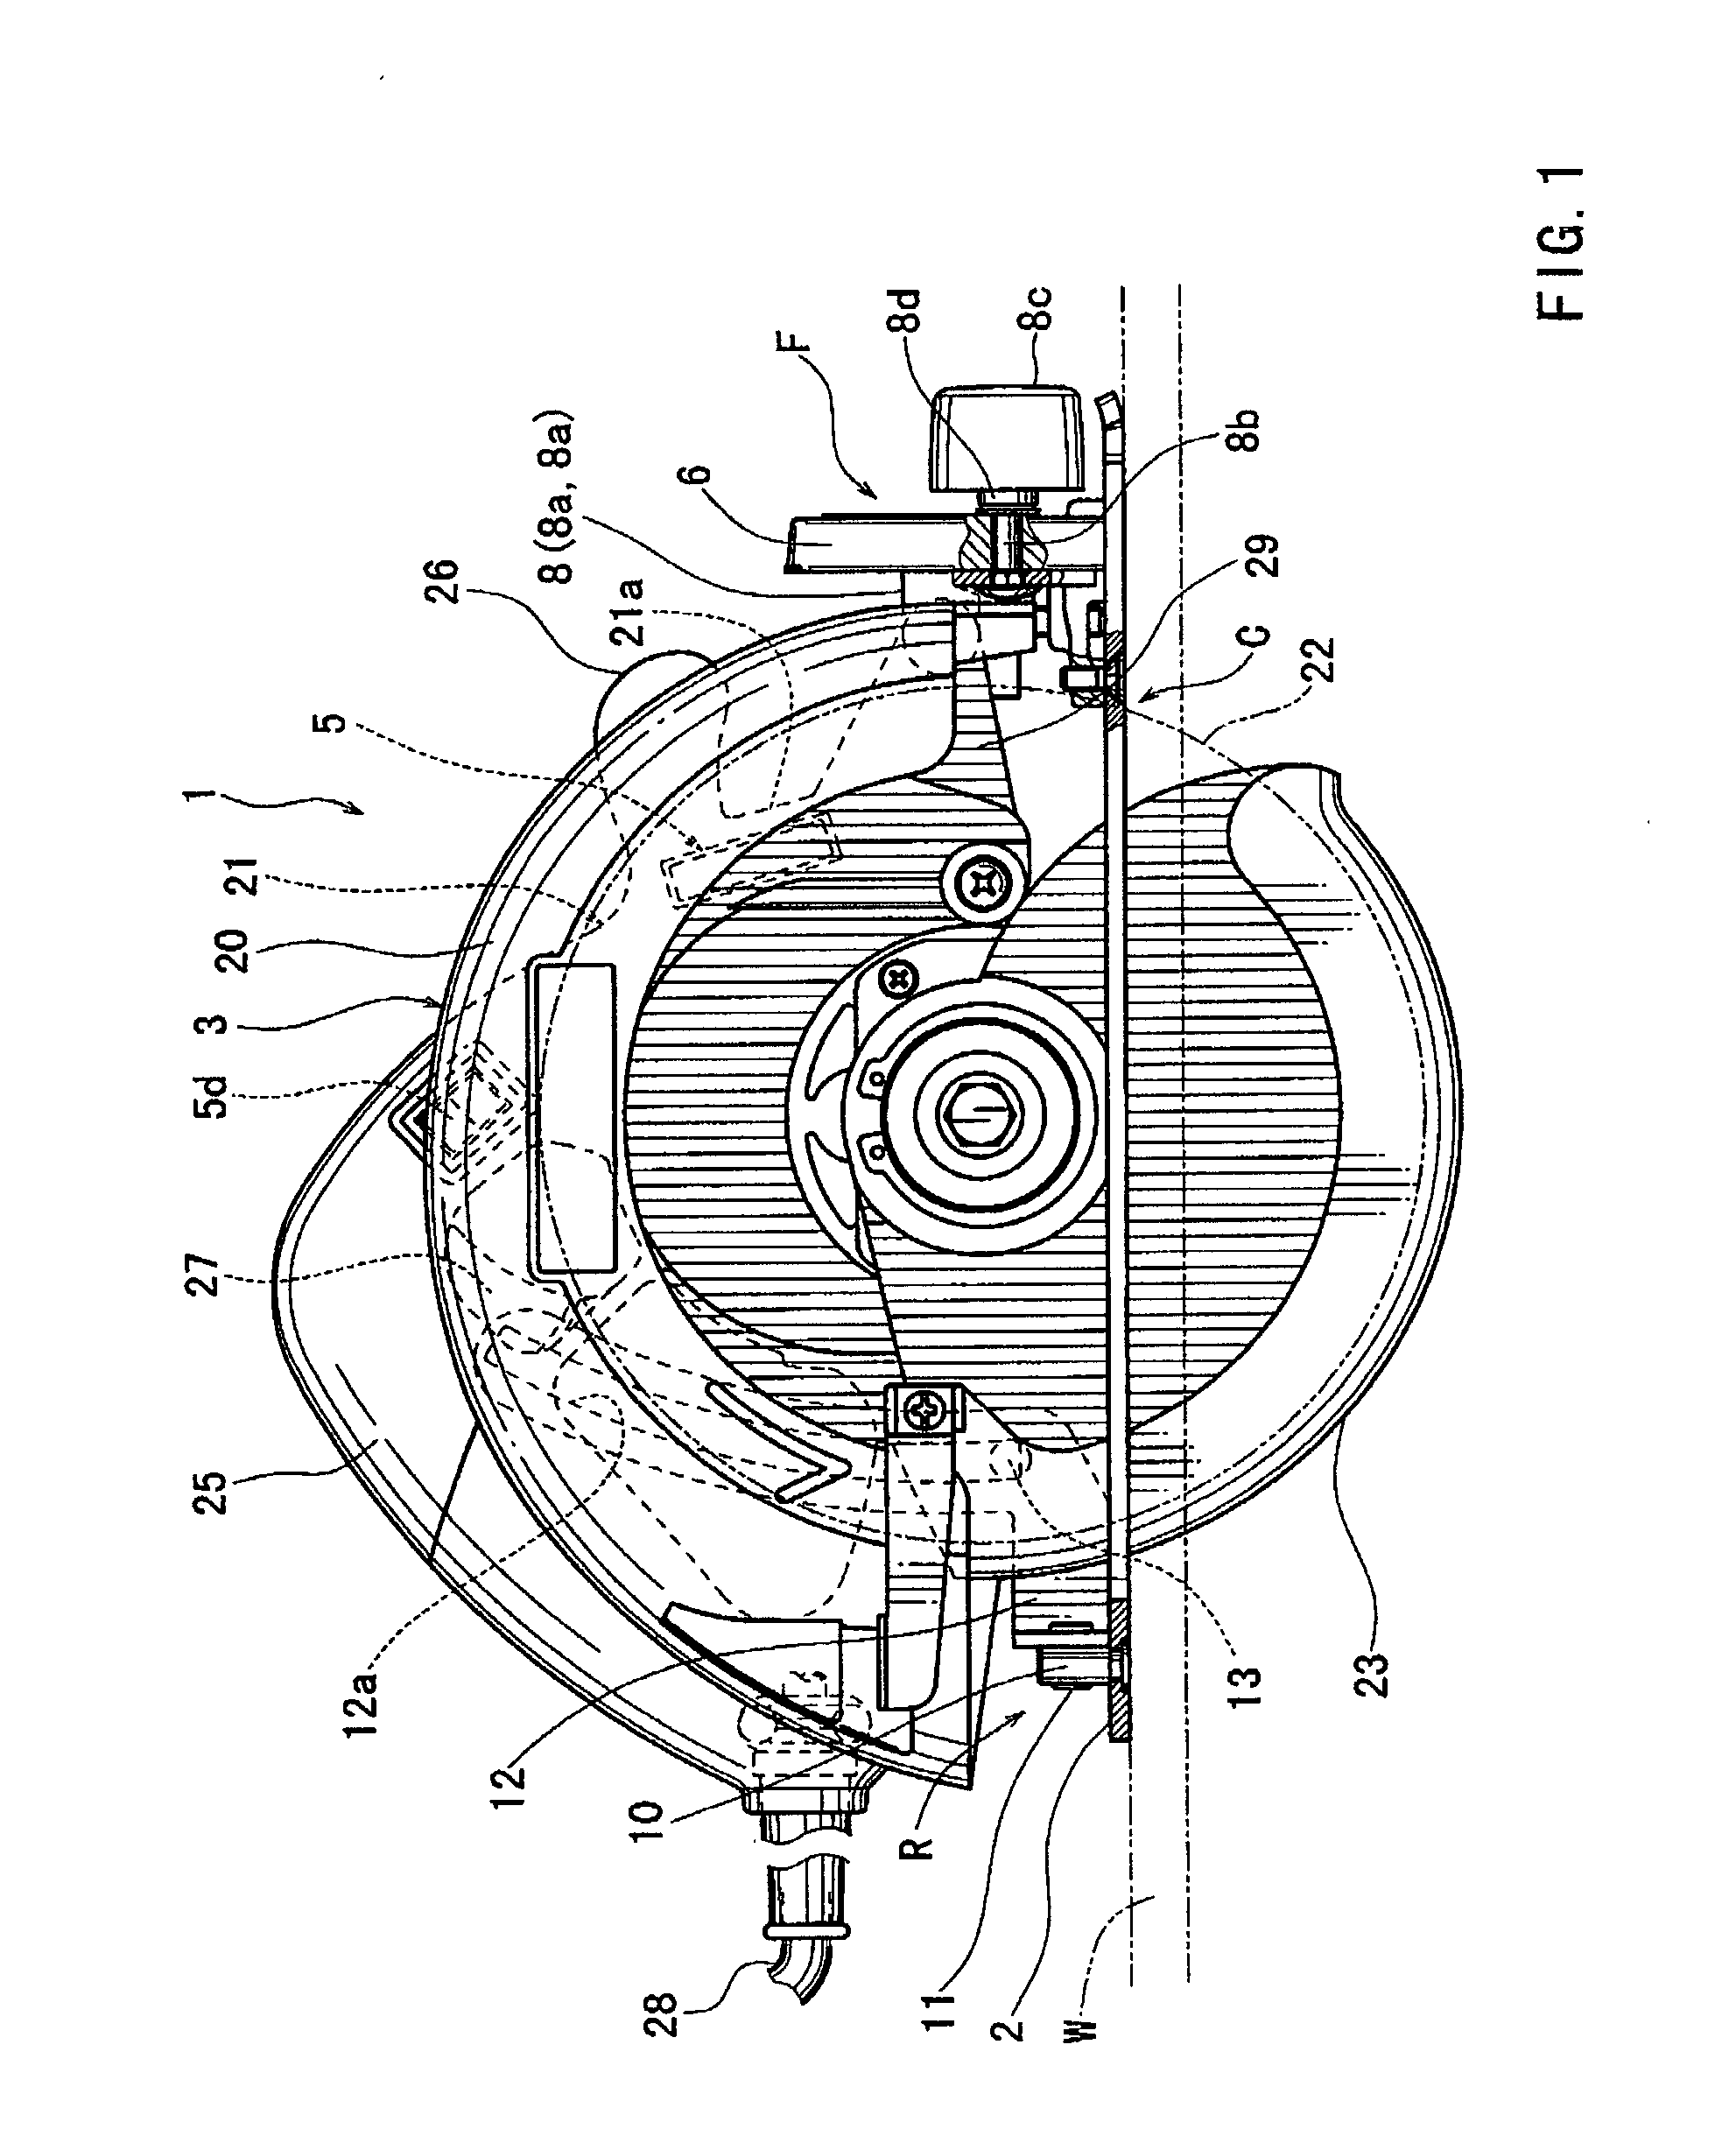 Cutting tools having lighting devices